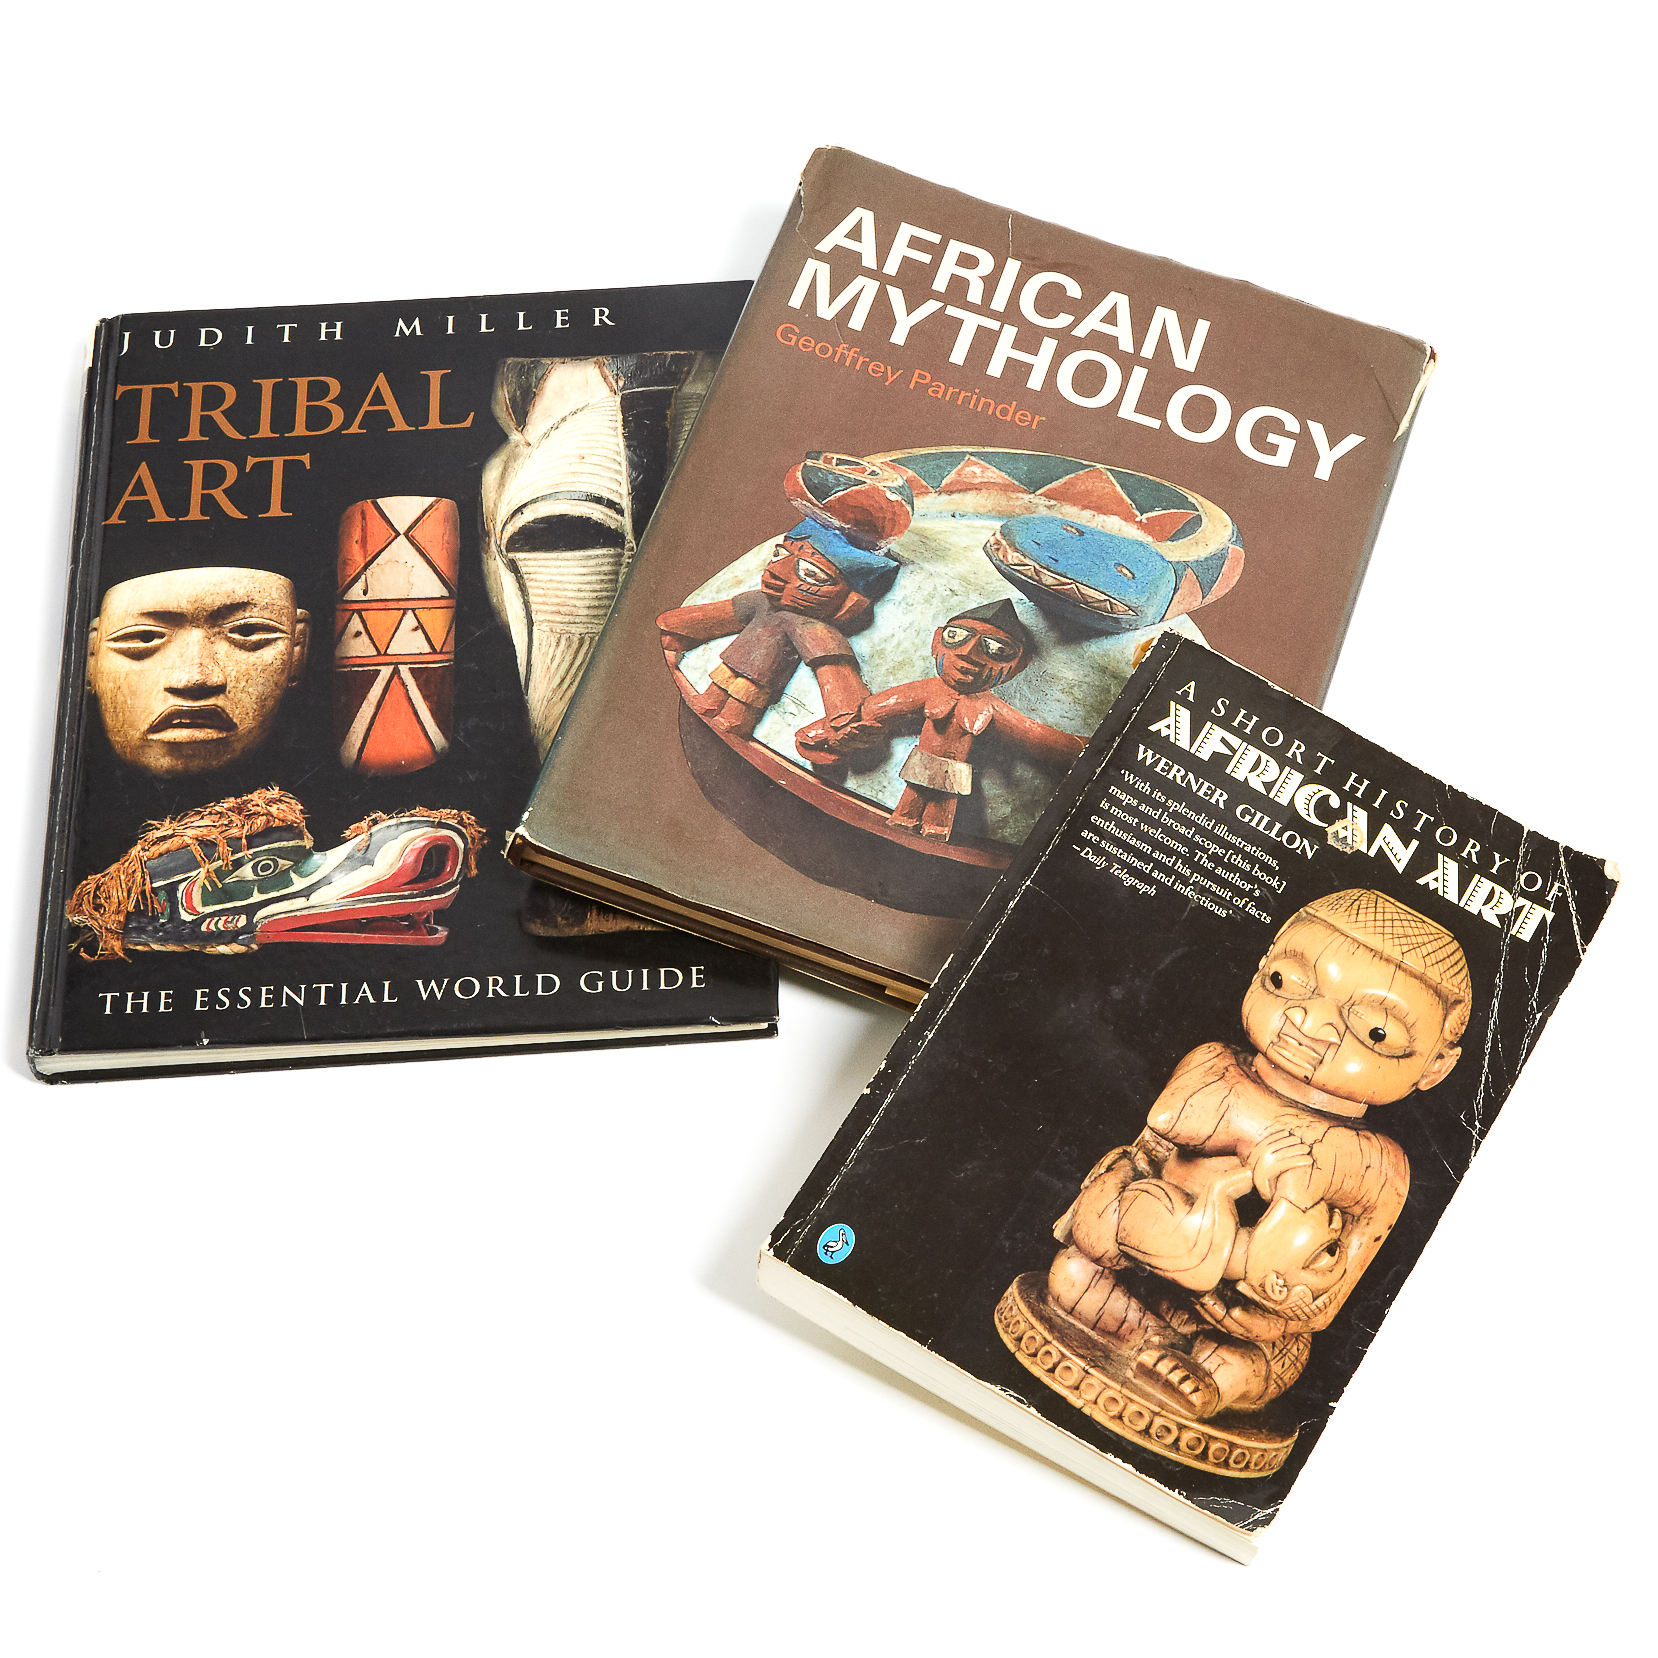 Two African Art Reference Books together with a Tribal art reference book